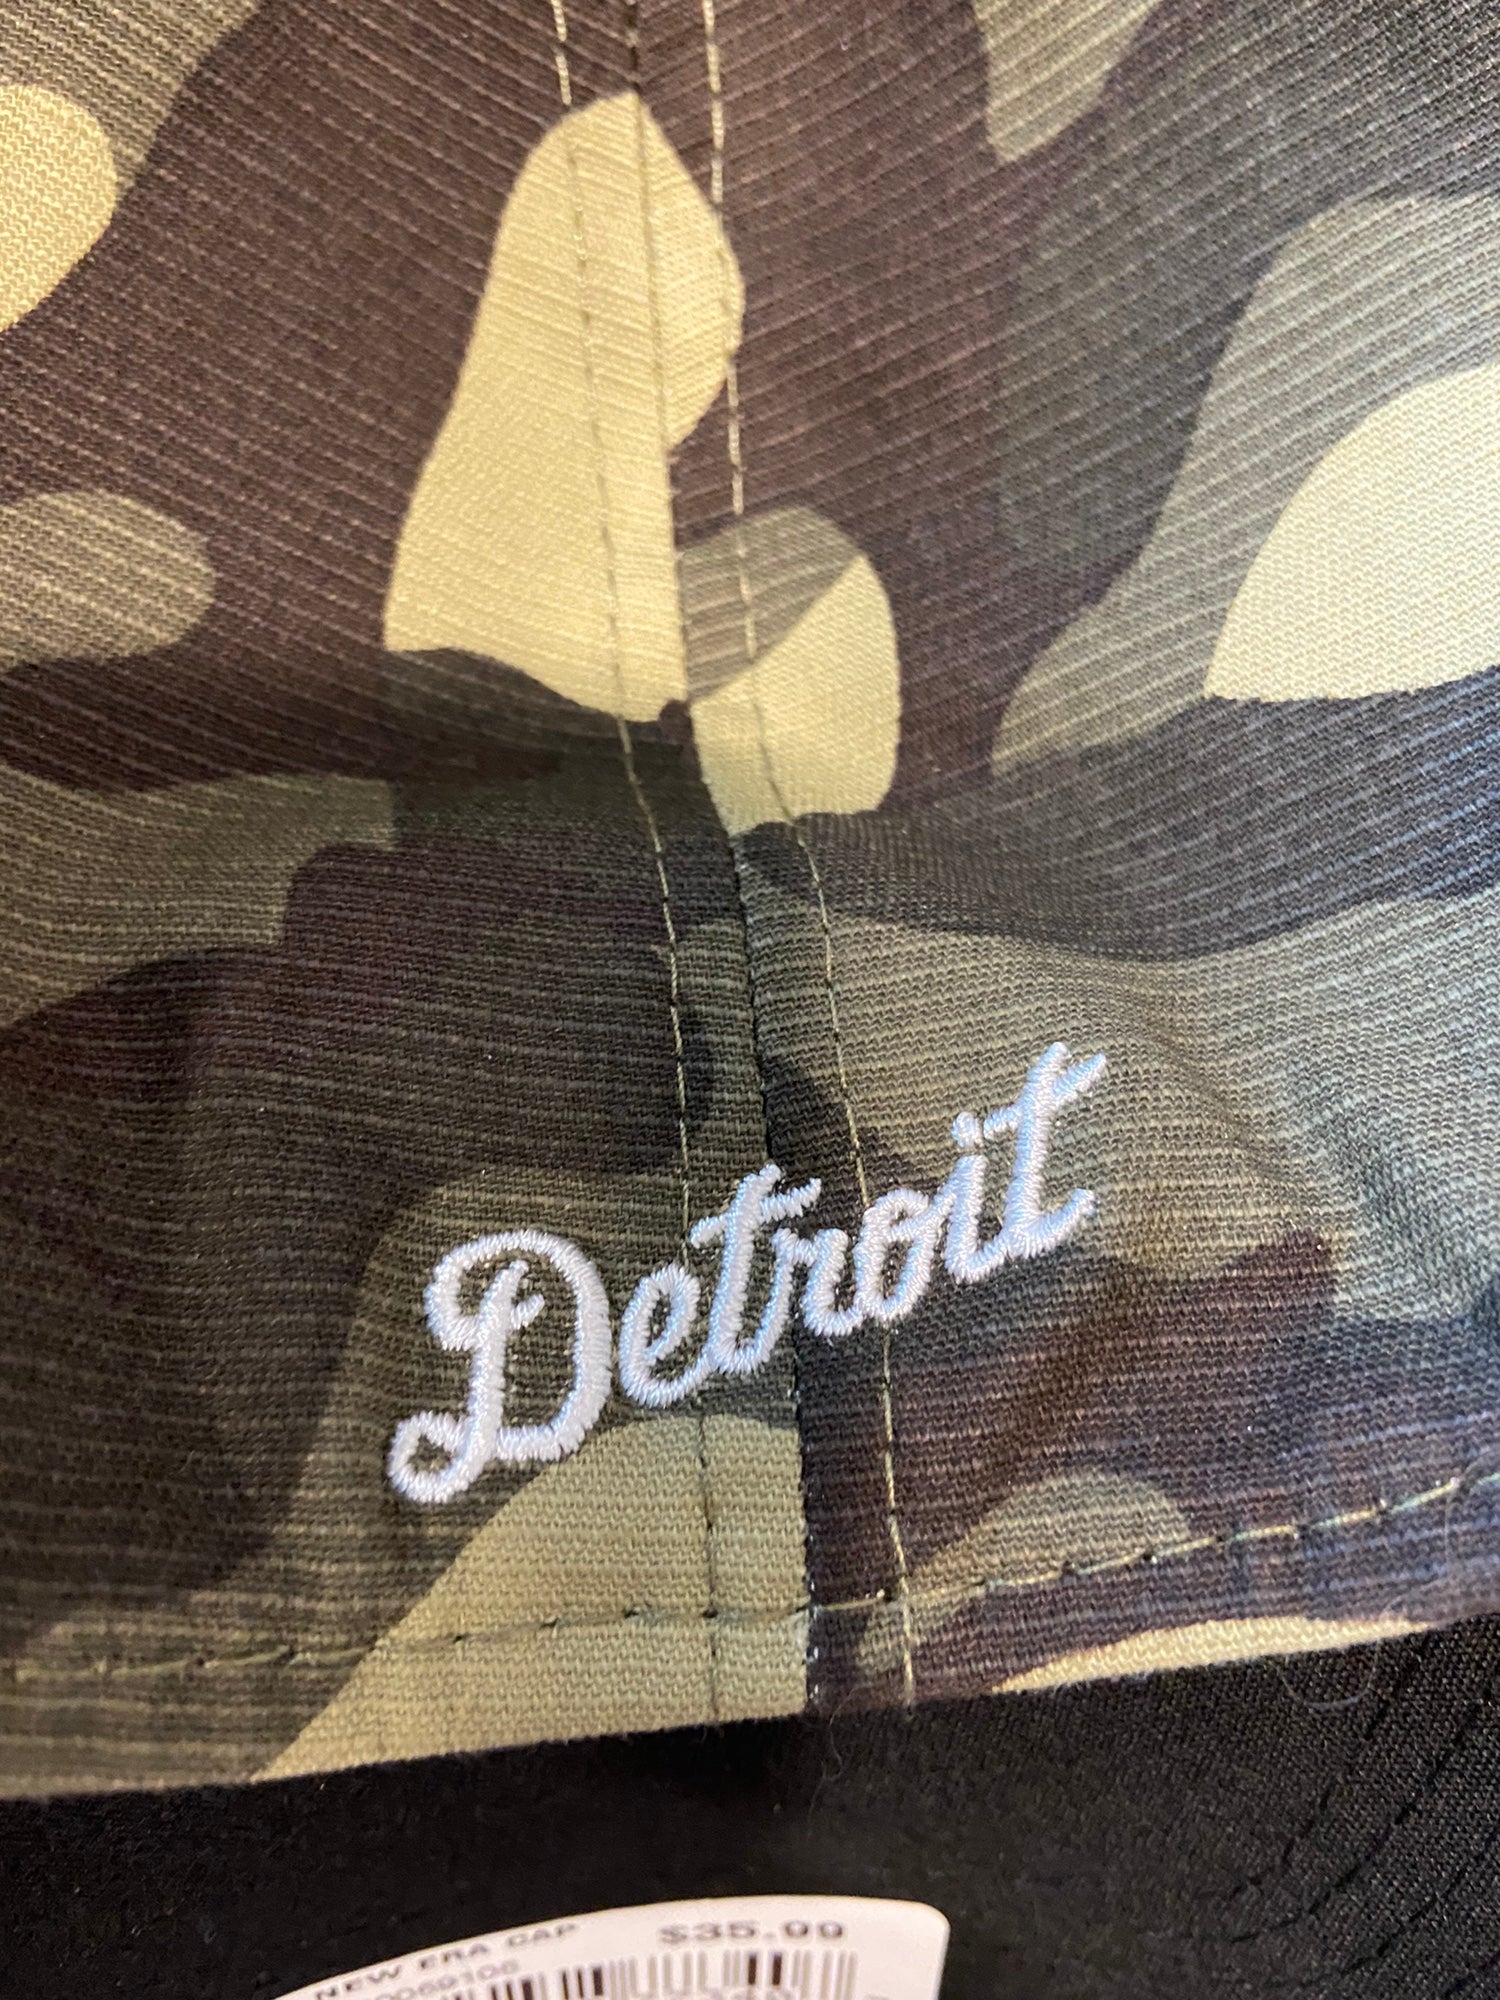 MLB Detroit Tigers “Armed Forces Day” Collection Camo New Era Hat, Size  Medium-Large NEW NWT